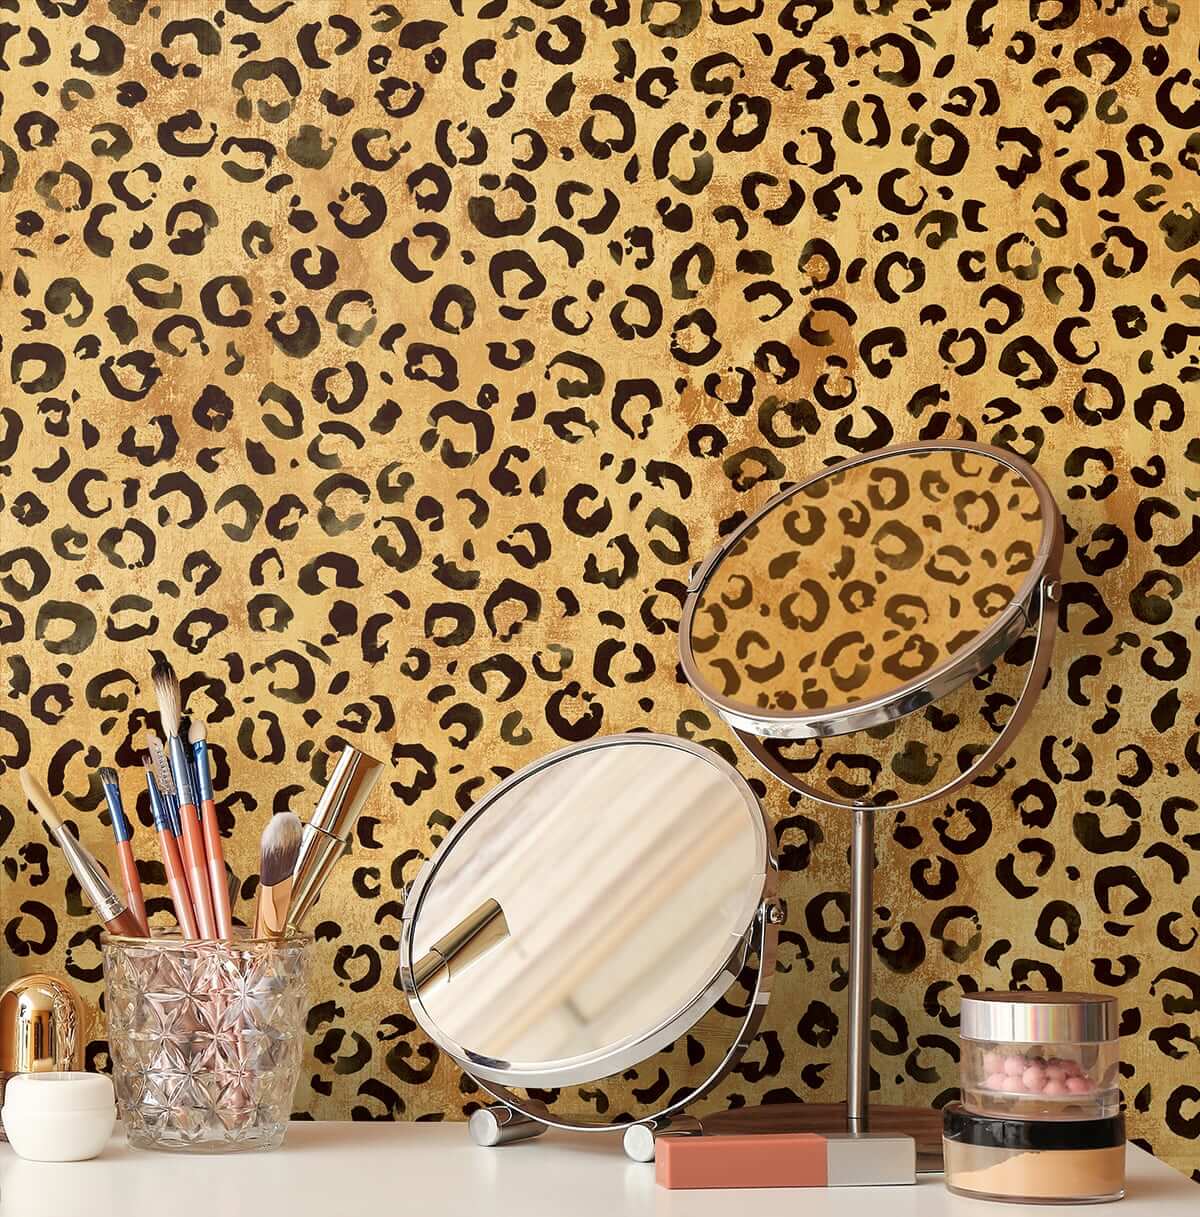 Tan Animal Print Peel and Stick Removable Wallpaper 0513 - Sample 11in x 24in (28x61cm)